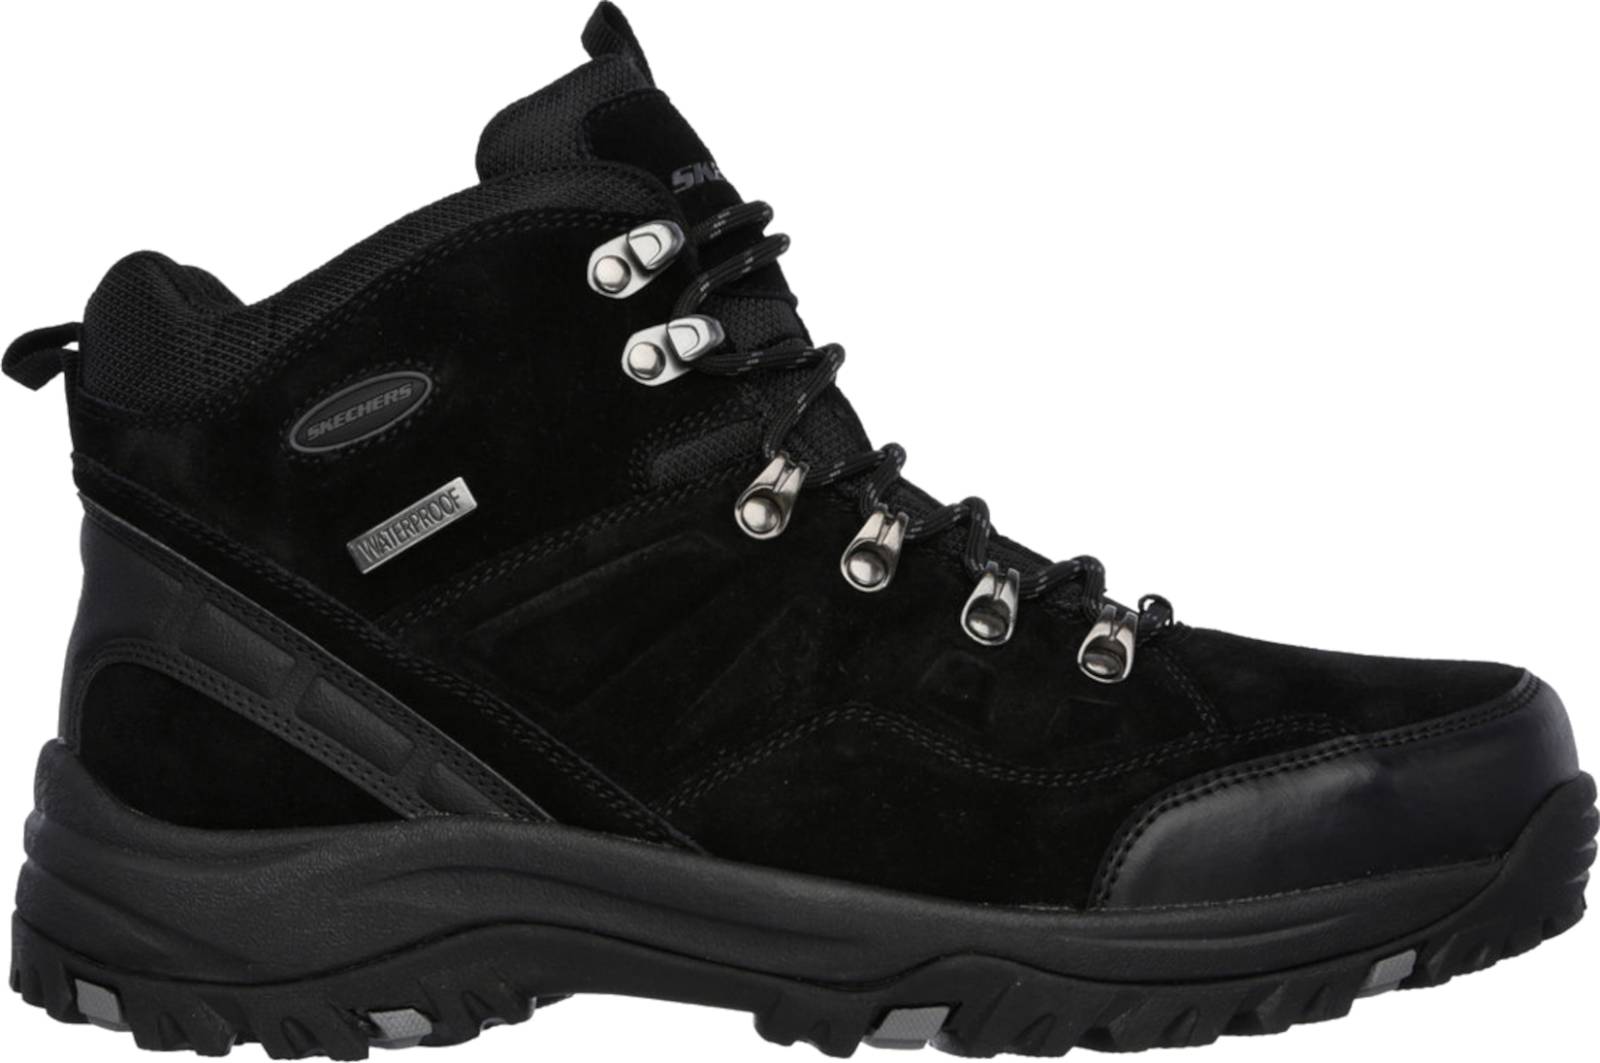 Skechers hiking boots: Save up to 11 